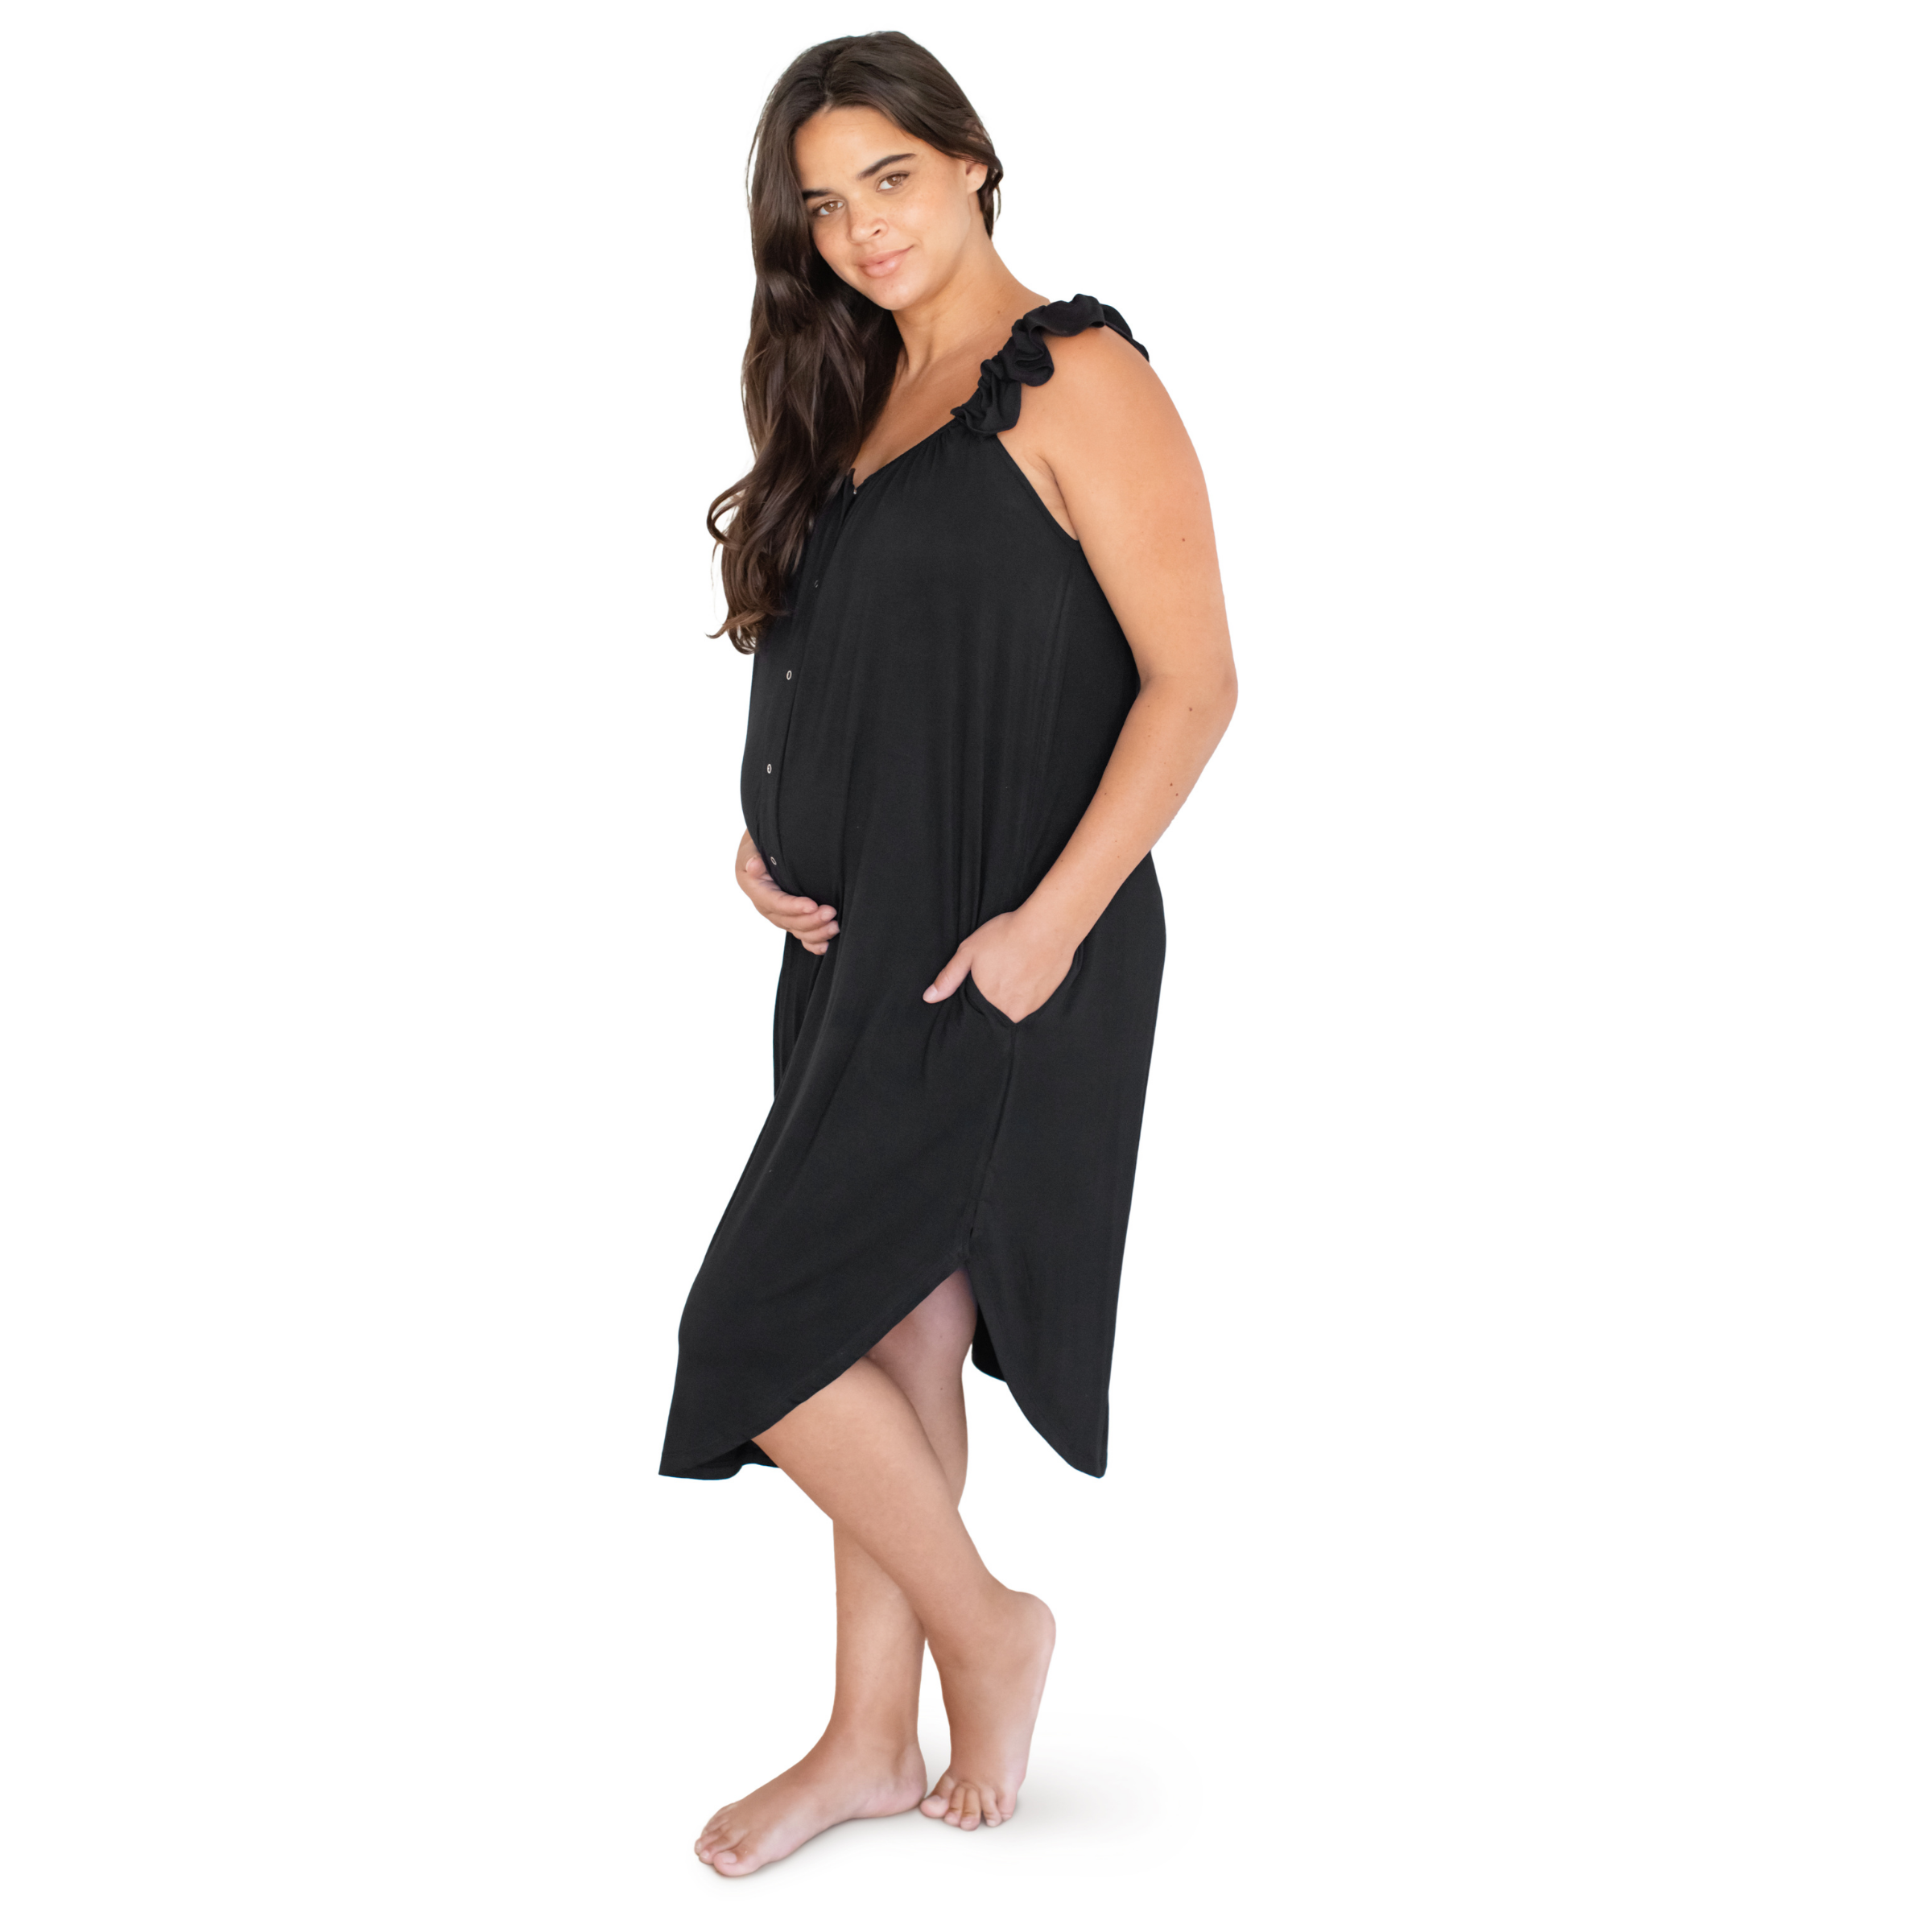 Kindred Bravely - Ruffle Strap Labor & Delivery Gown – Reclaim